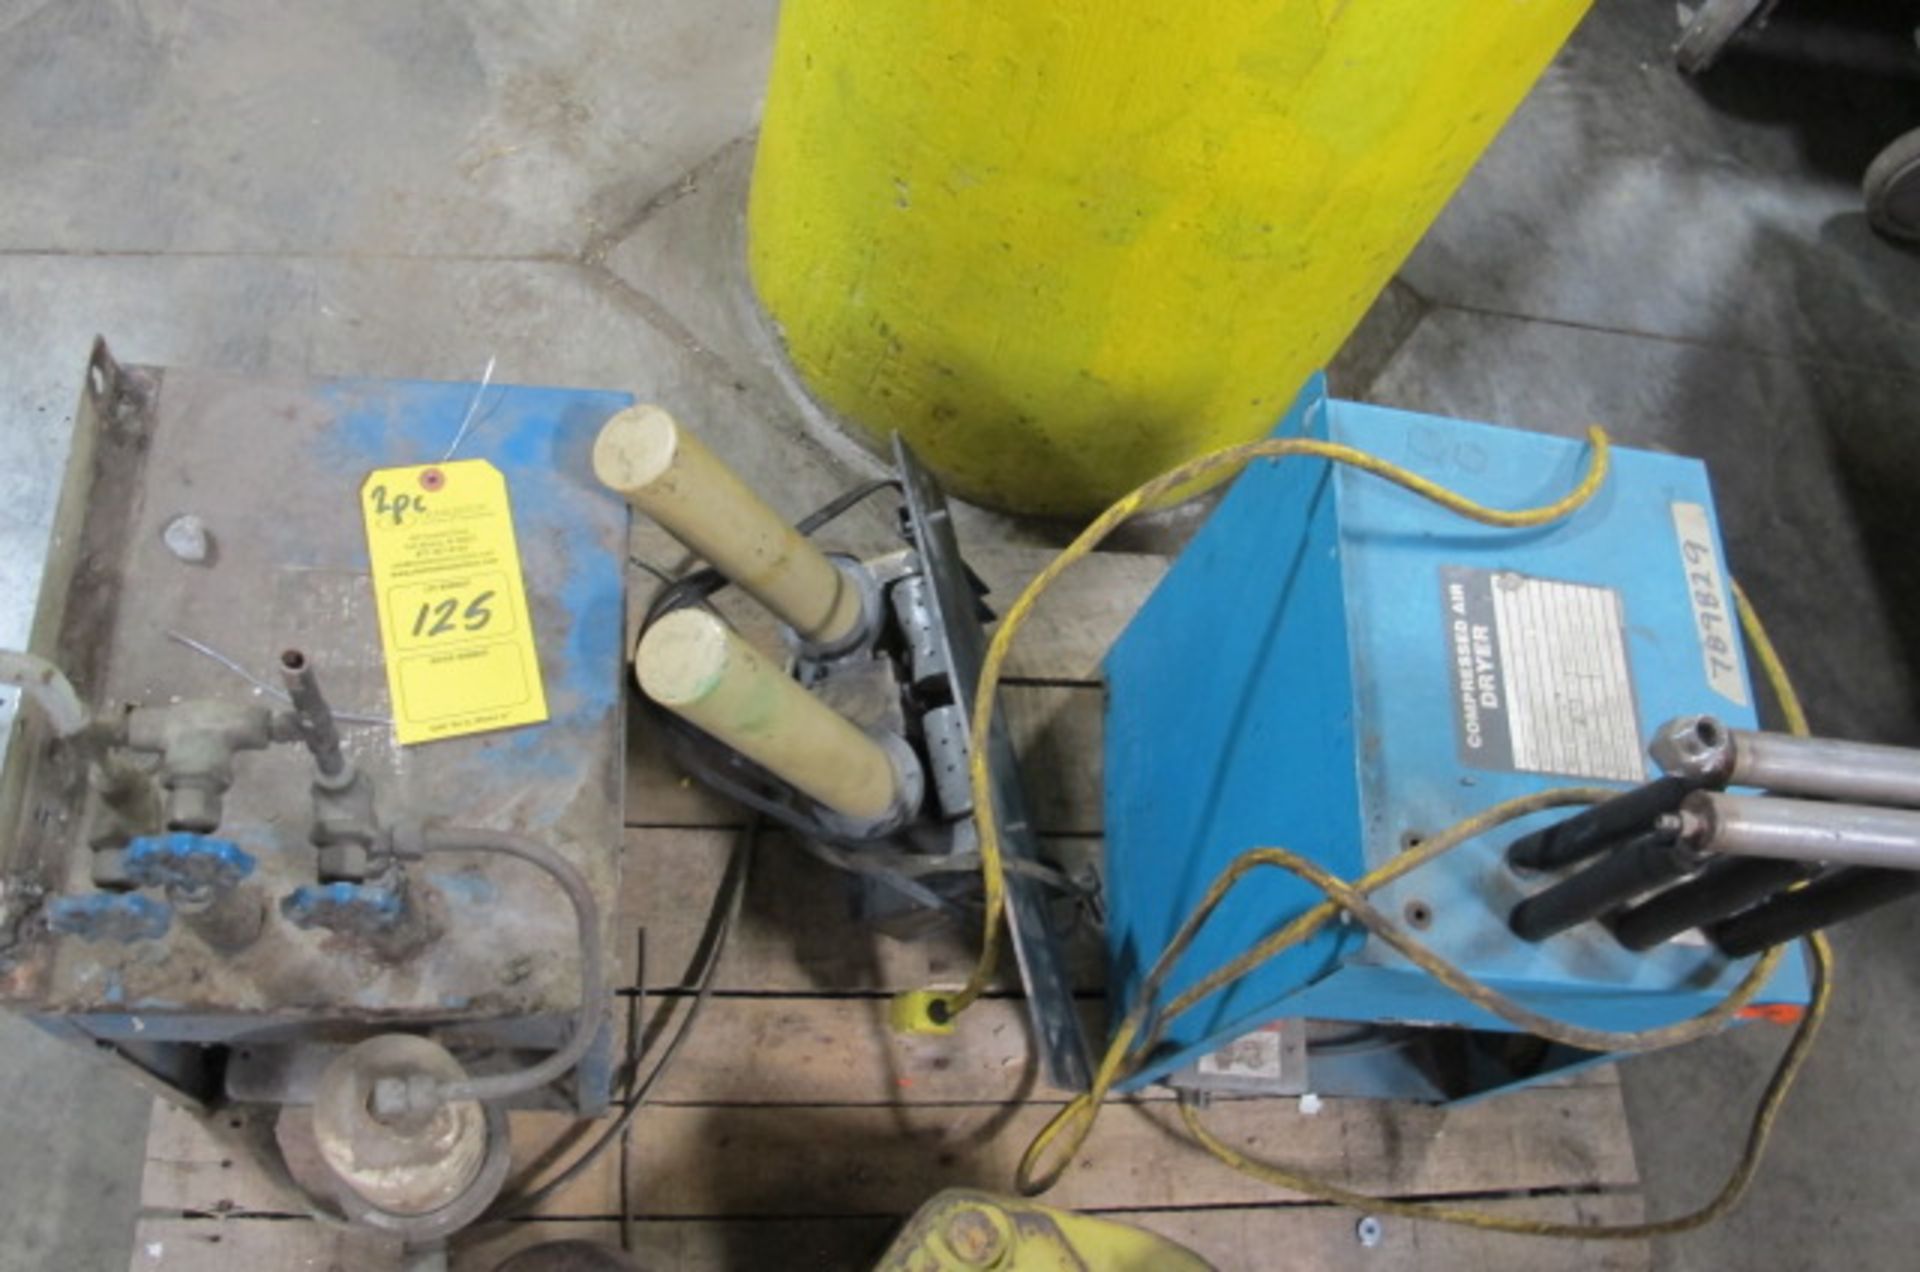 (2) COMPRESSED AIR DRYERS; M# E-30-SS 7470 OH 120, Lyons, Ohio 43523 - all Gaylord plastic pallets